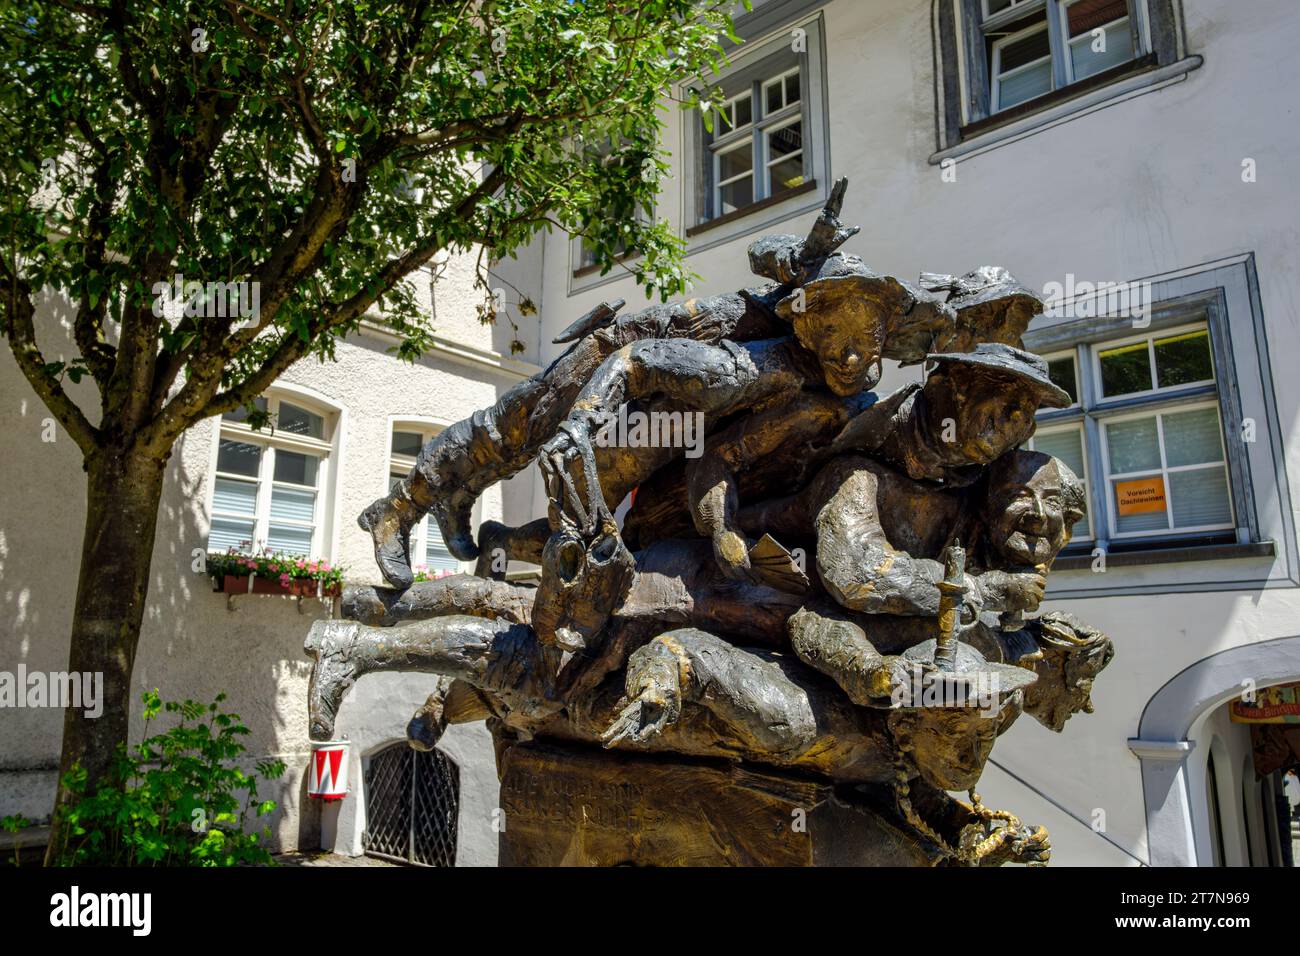 Spitting fountain with sculpture group 'Die verdruckten Allgäuer' by Joseph Michael Neustifter in the Old Town of Wangen, Upper Swabia, Germany. Stock Photo